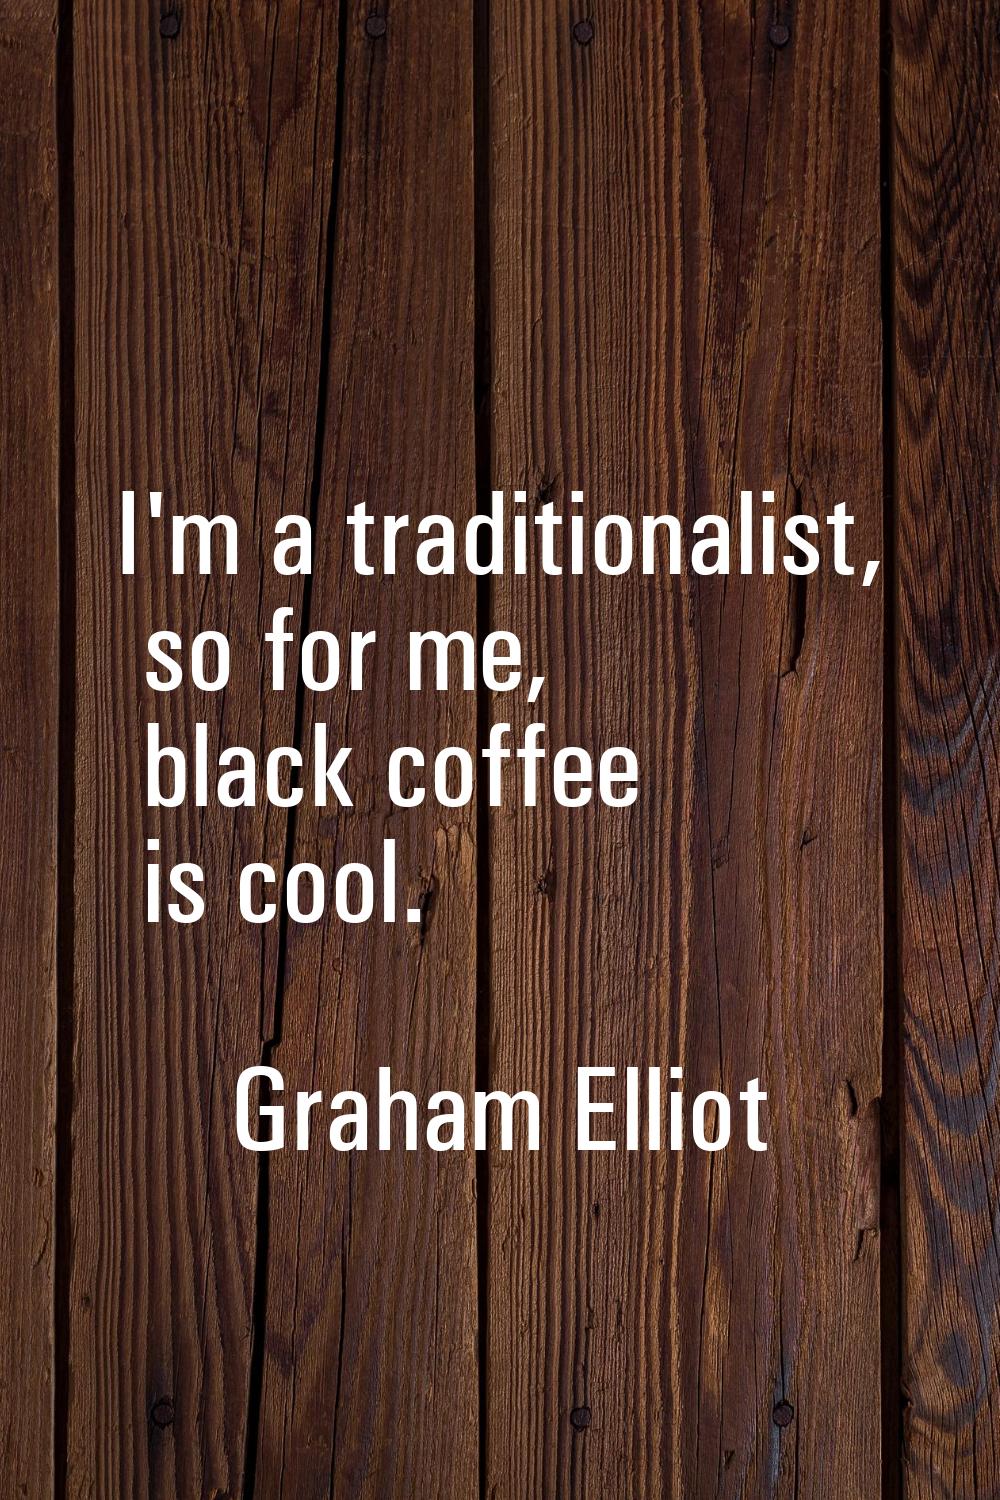 I'm a traditionalist, so for me, black coffee is cool.